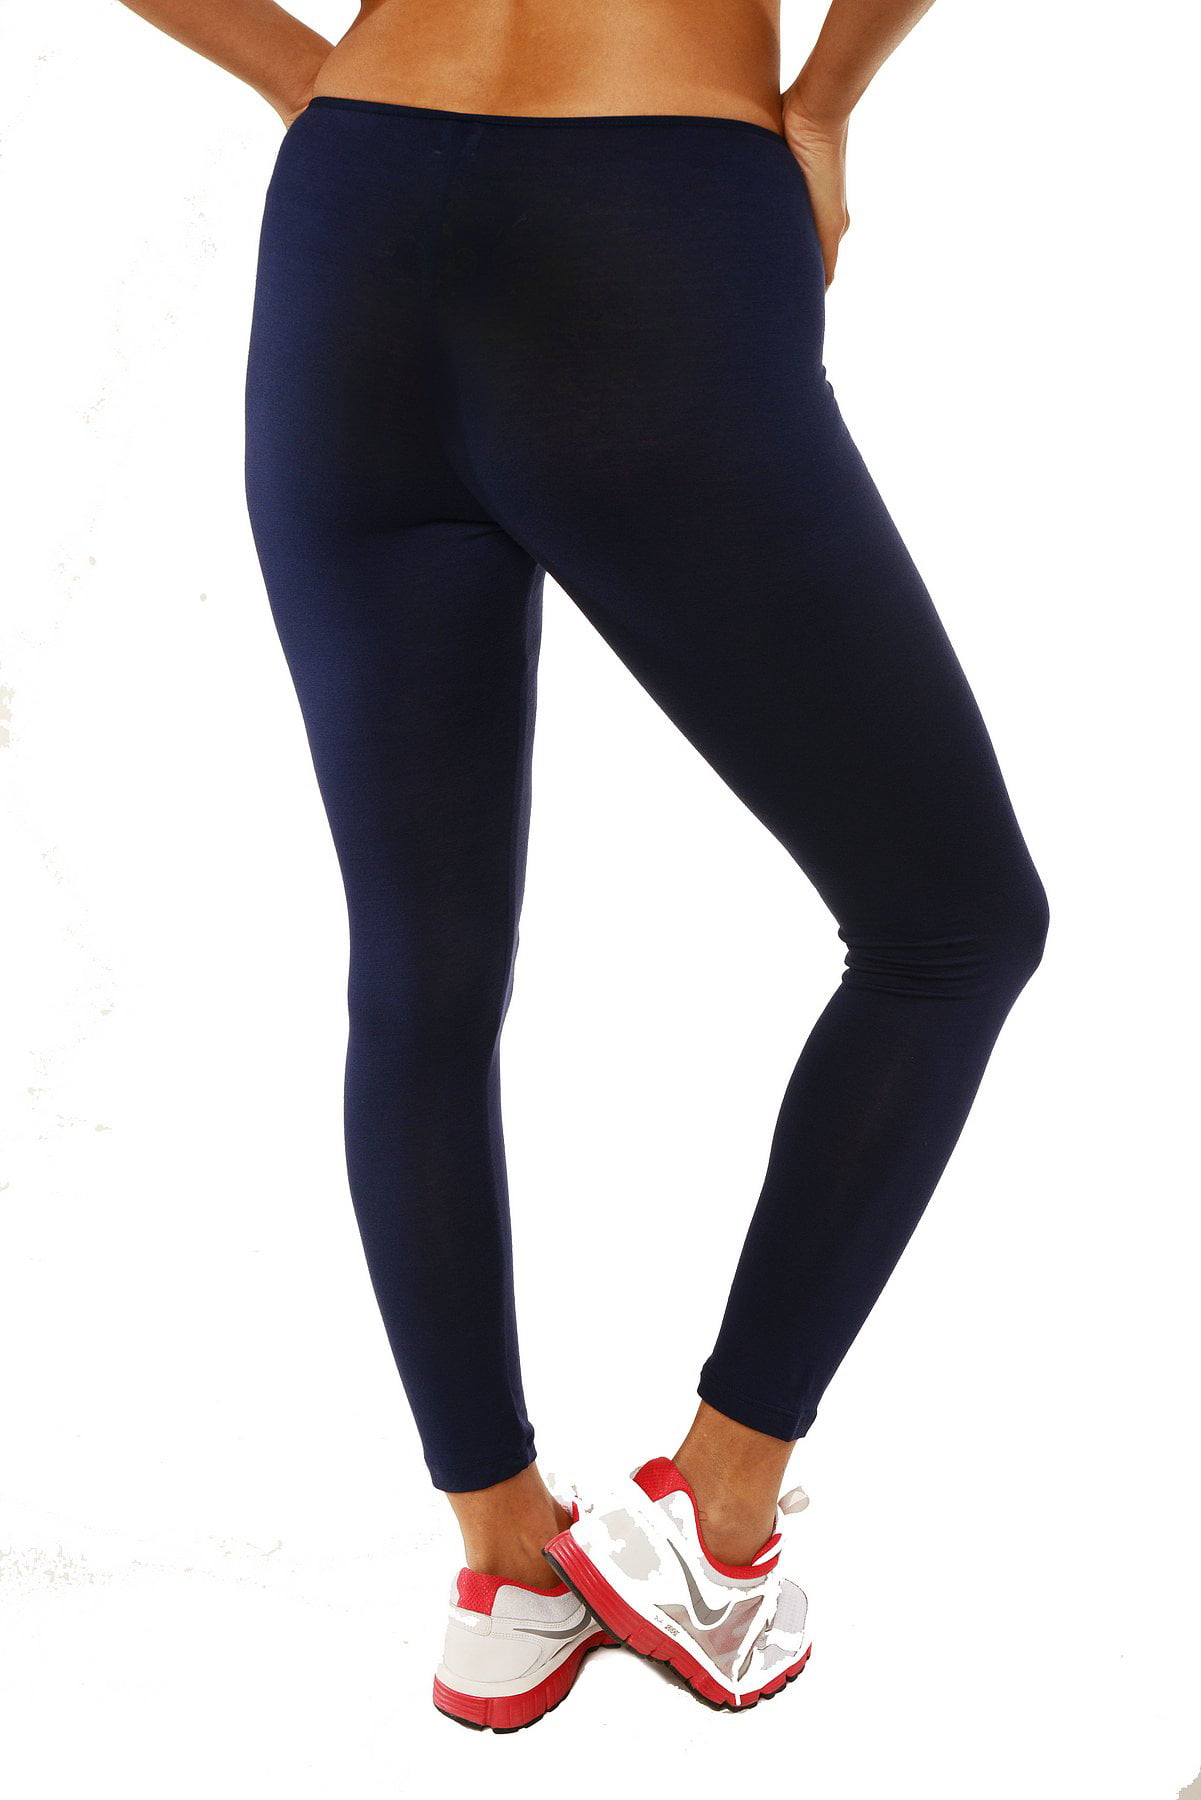 Ankle and comfort leggings wholesale rate available price 160Rs - Women -  1741871459